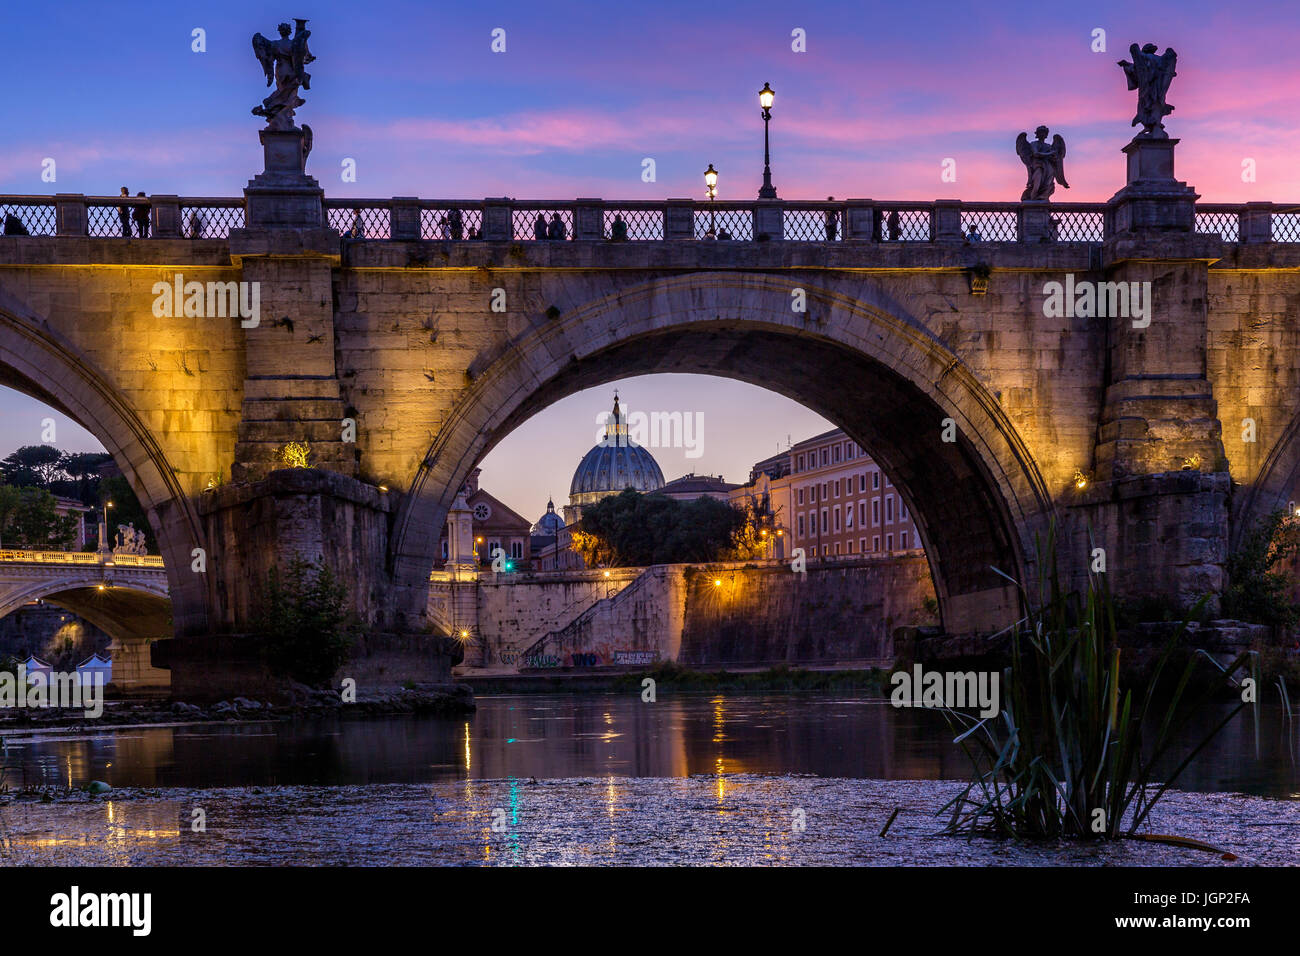 Saint Peter's Basilica with Sant'Angelo's bridge over Tiber at sunset, Rome, Italy Stock Photo